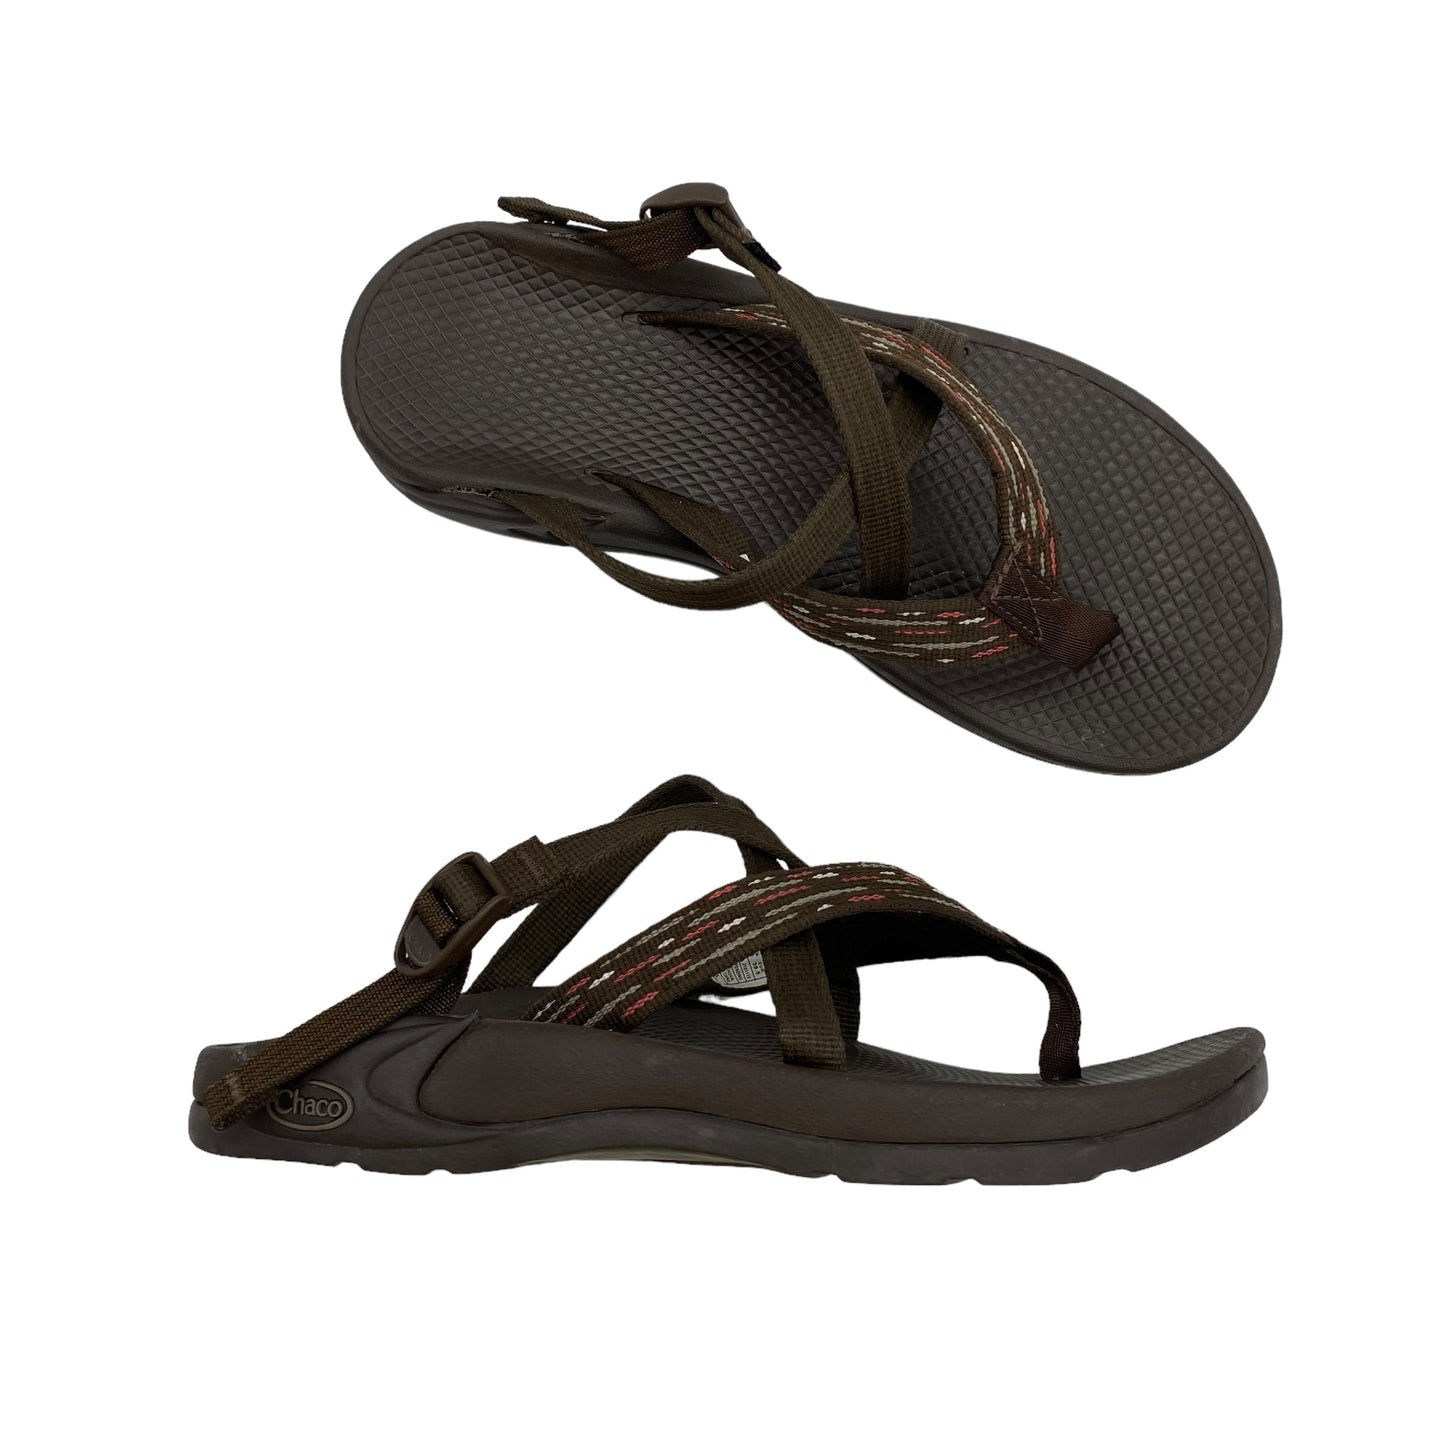 BROWN SANDALS FLATS by CHACOS Size:8